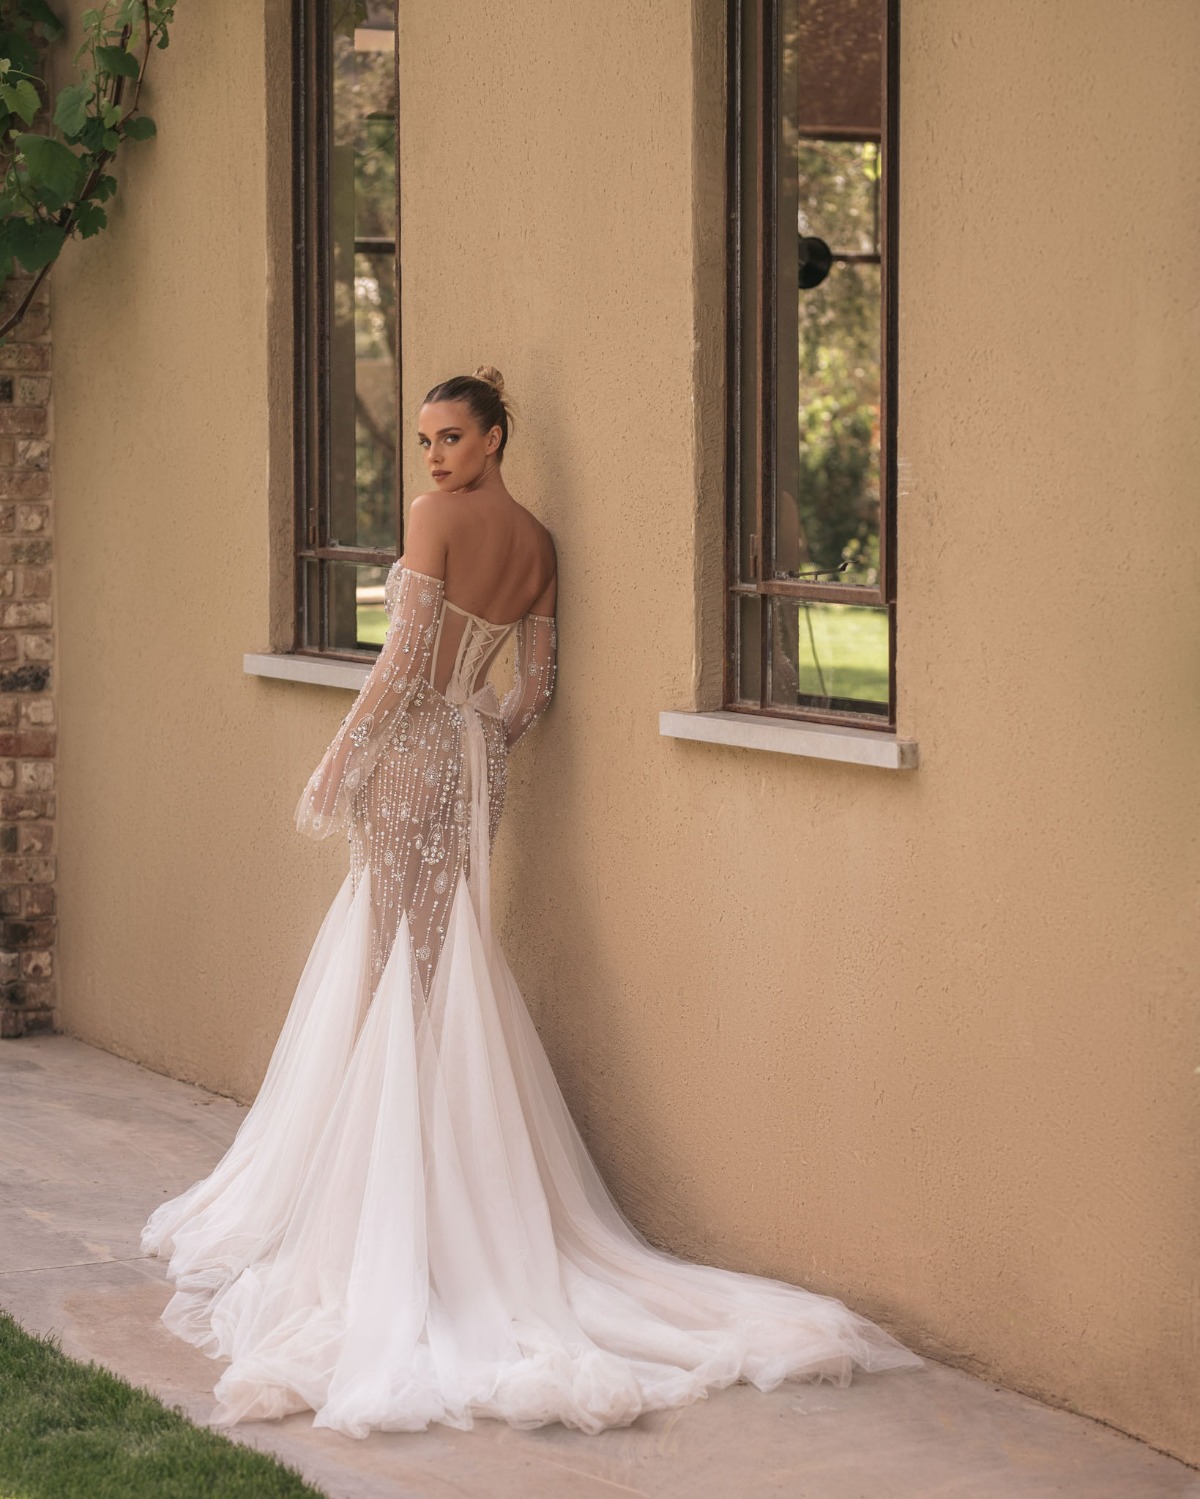 New Berta Gowns Are Here And We're Losing Our Minds